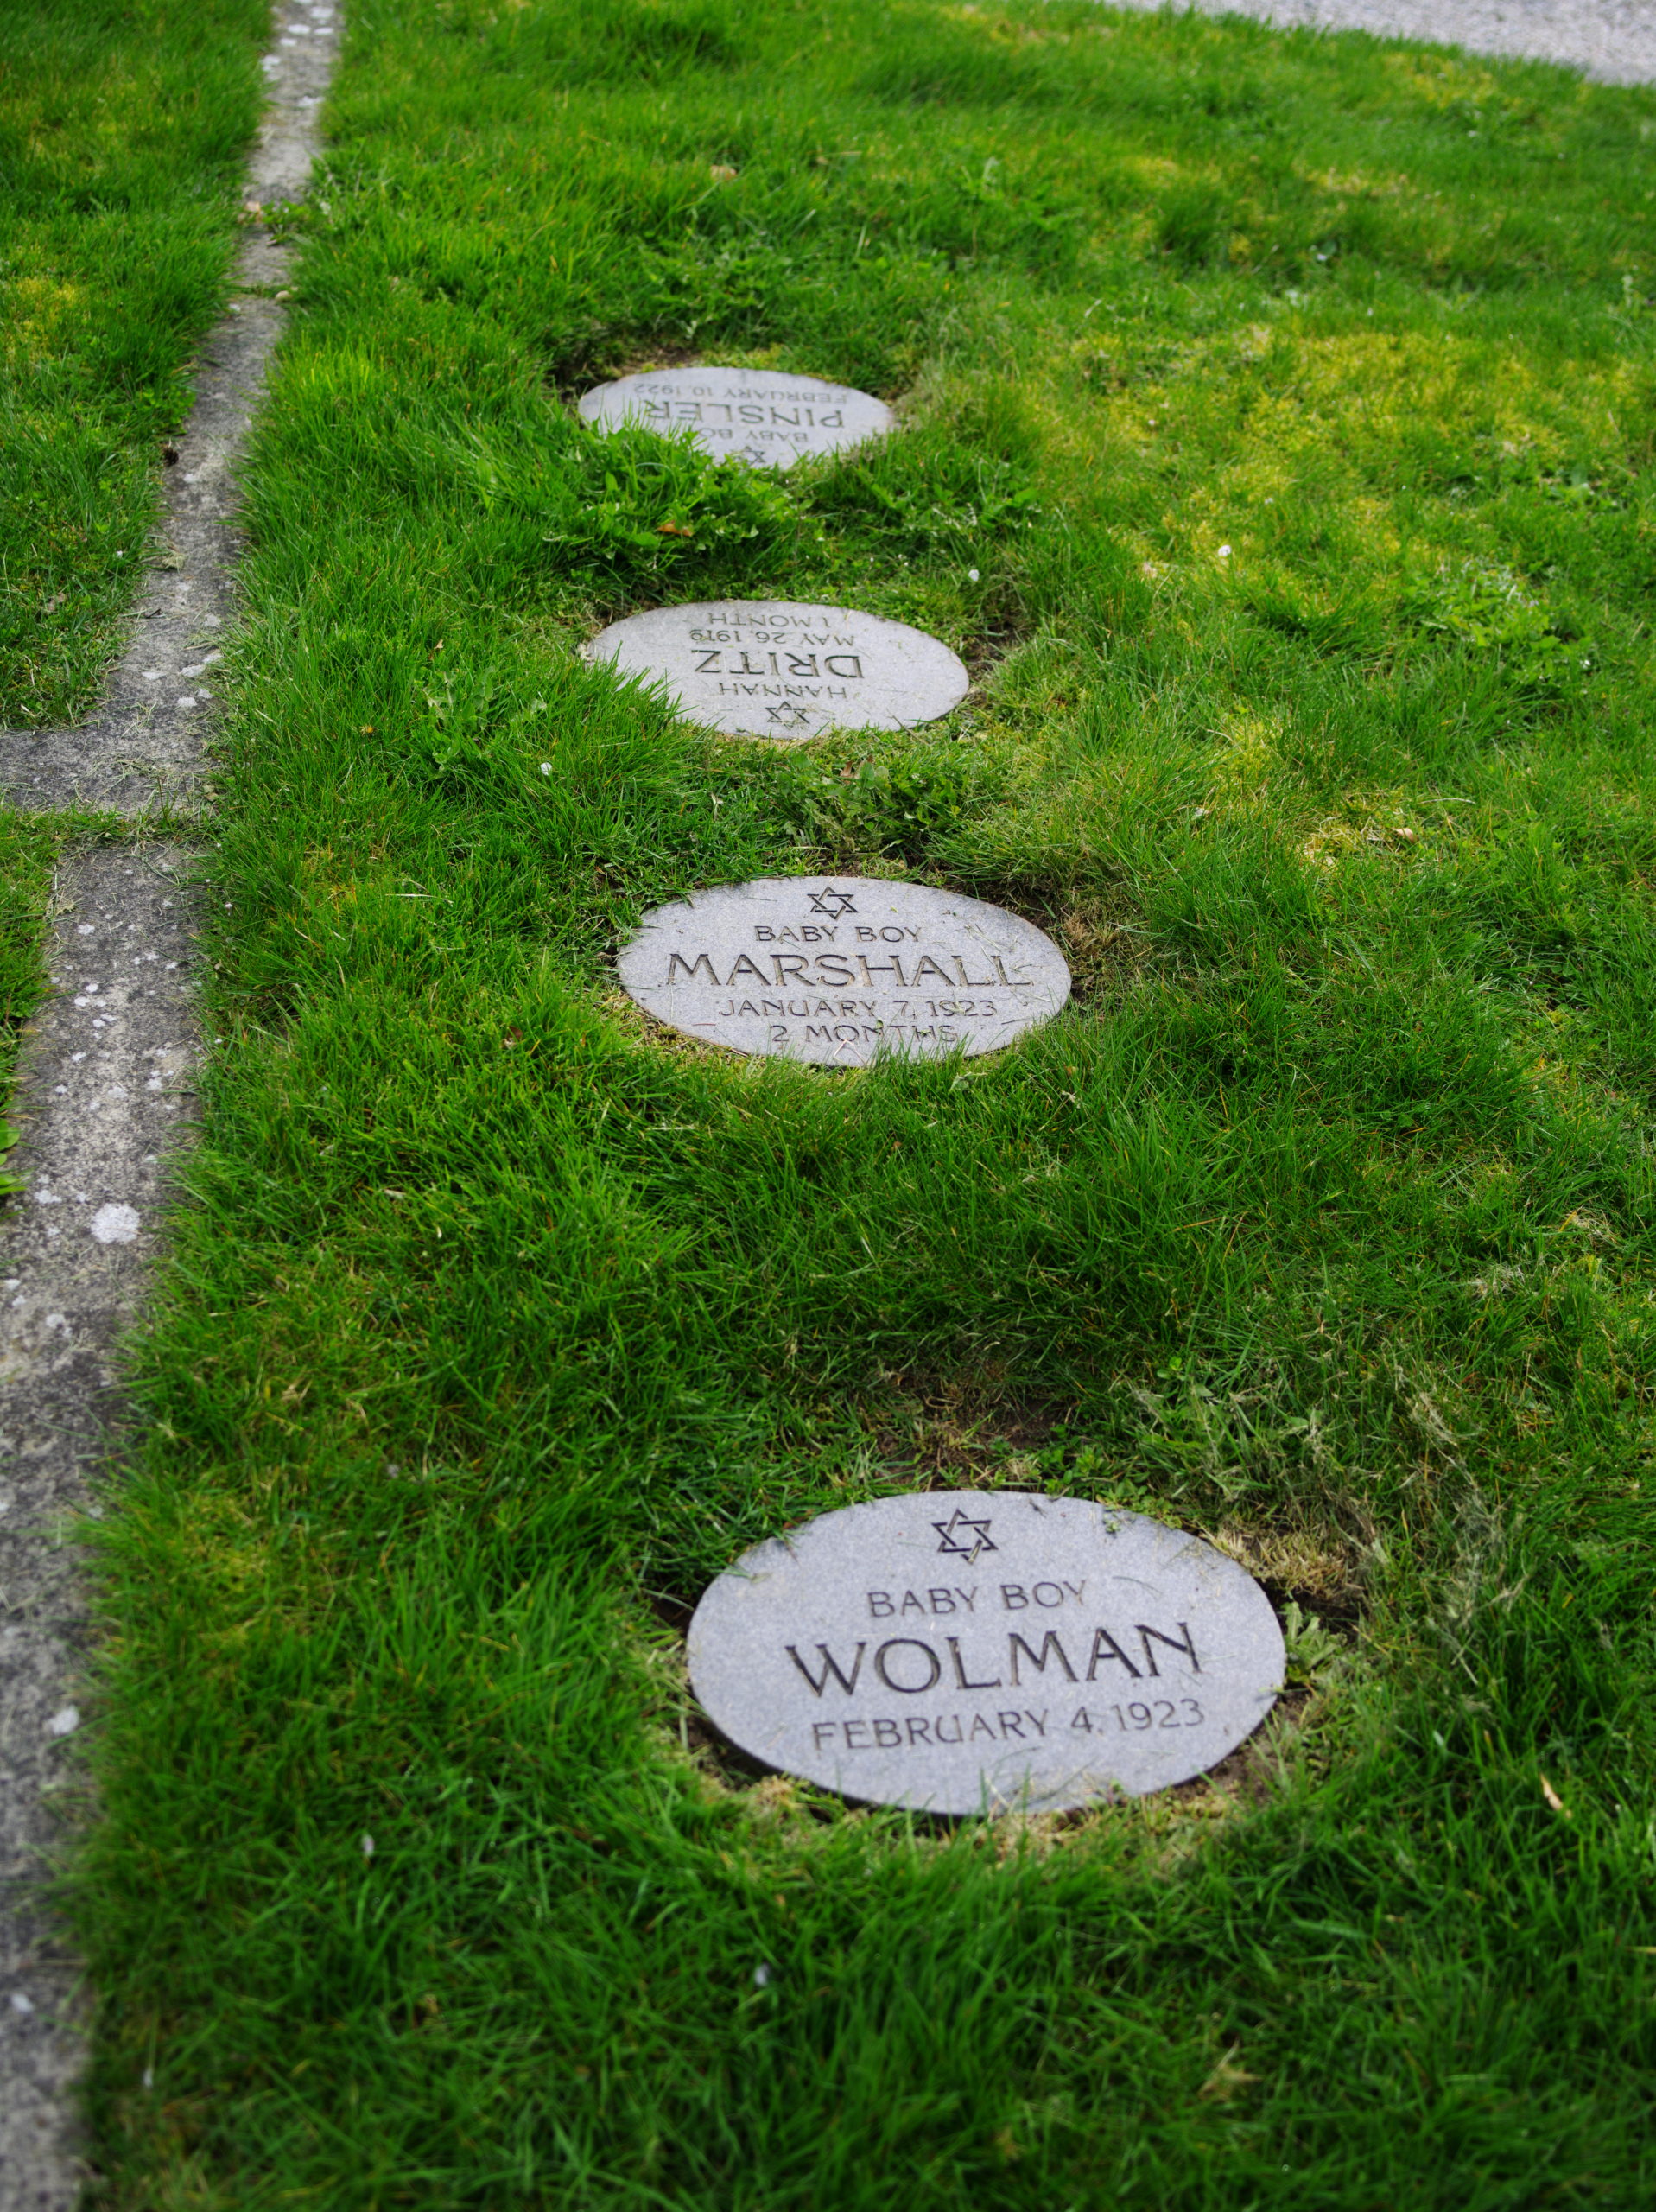 Image Description: Four flat oval head stones are nested in a vertical line into the grassy burial site of the Jewish Cemetery. At the top of each headstone is a six pointed star, also called the Star of David.The stone closest to the camera reads: BABY BOY WOLMAN FEBRUARY 4, 2023 The stone behind this stone in the photograph reads: BABY BOY MARSHALL JANUARY 7, 1923 2 MONTHS The next stone is oriented away from the camera in the photograph, which reads: HANNAH DRITZ MAY 26, 1919 1 MONTH The stone farthest away from the camera in the photograph reads: BABY BOY PINSLER FEBRUARY 10, 1923